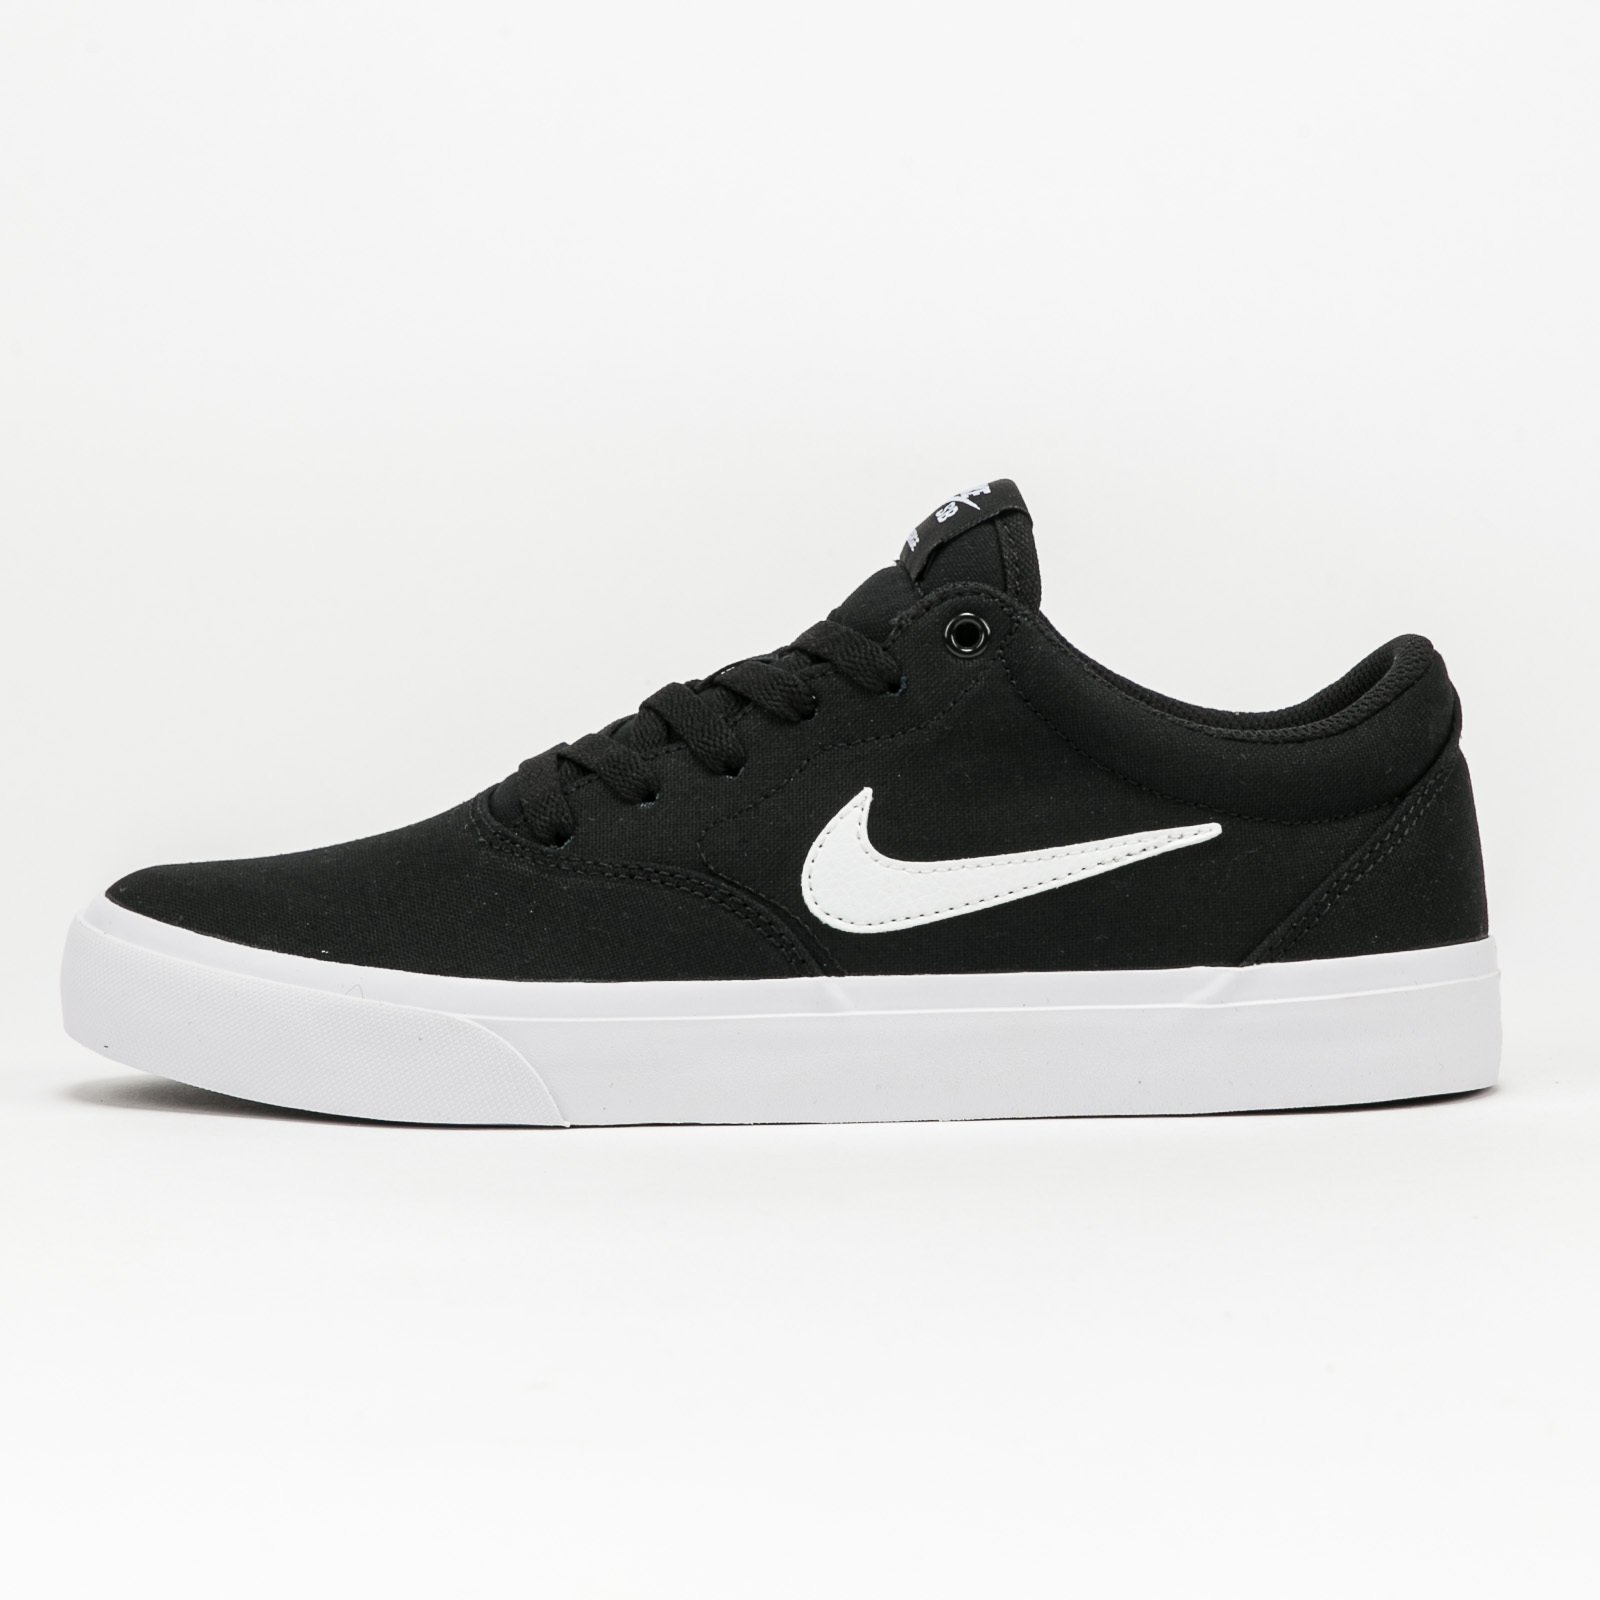 legal chemicals Unnecessary Nike SB Charge Canvas CD6279-002 | FlexDog